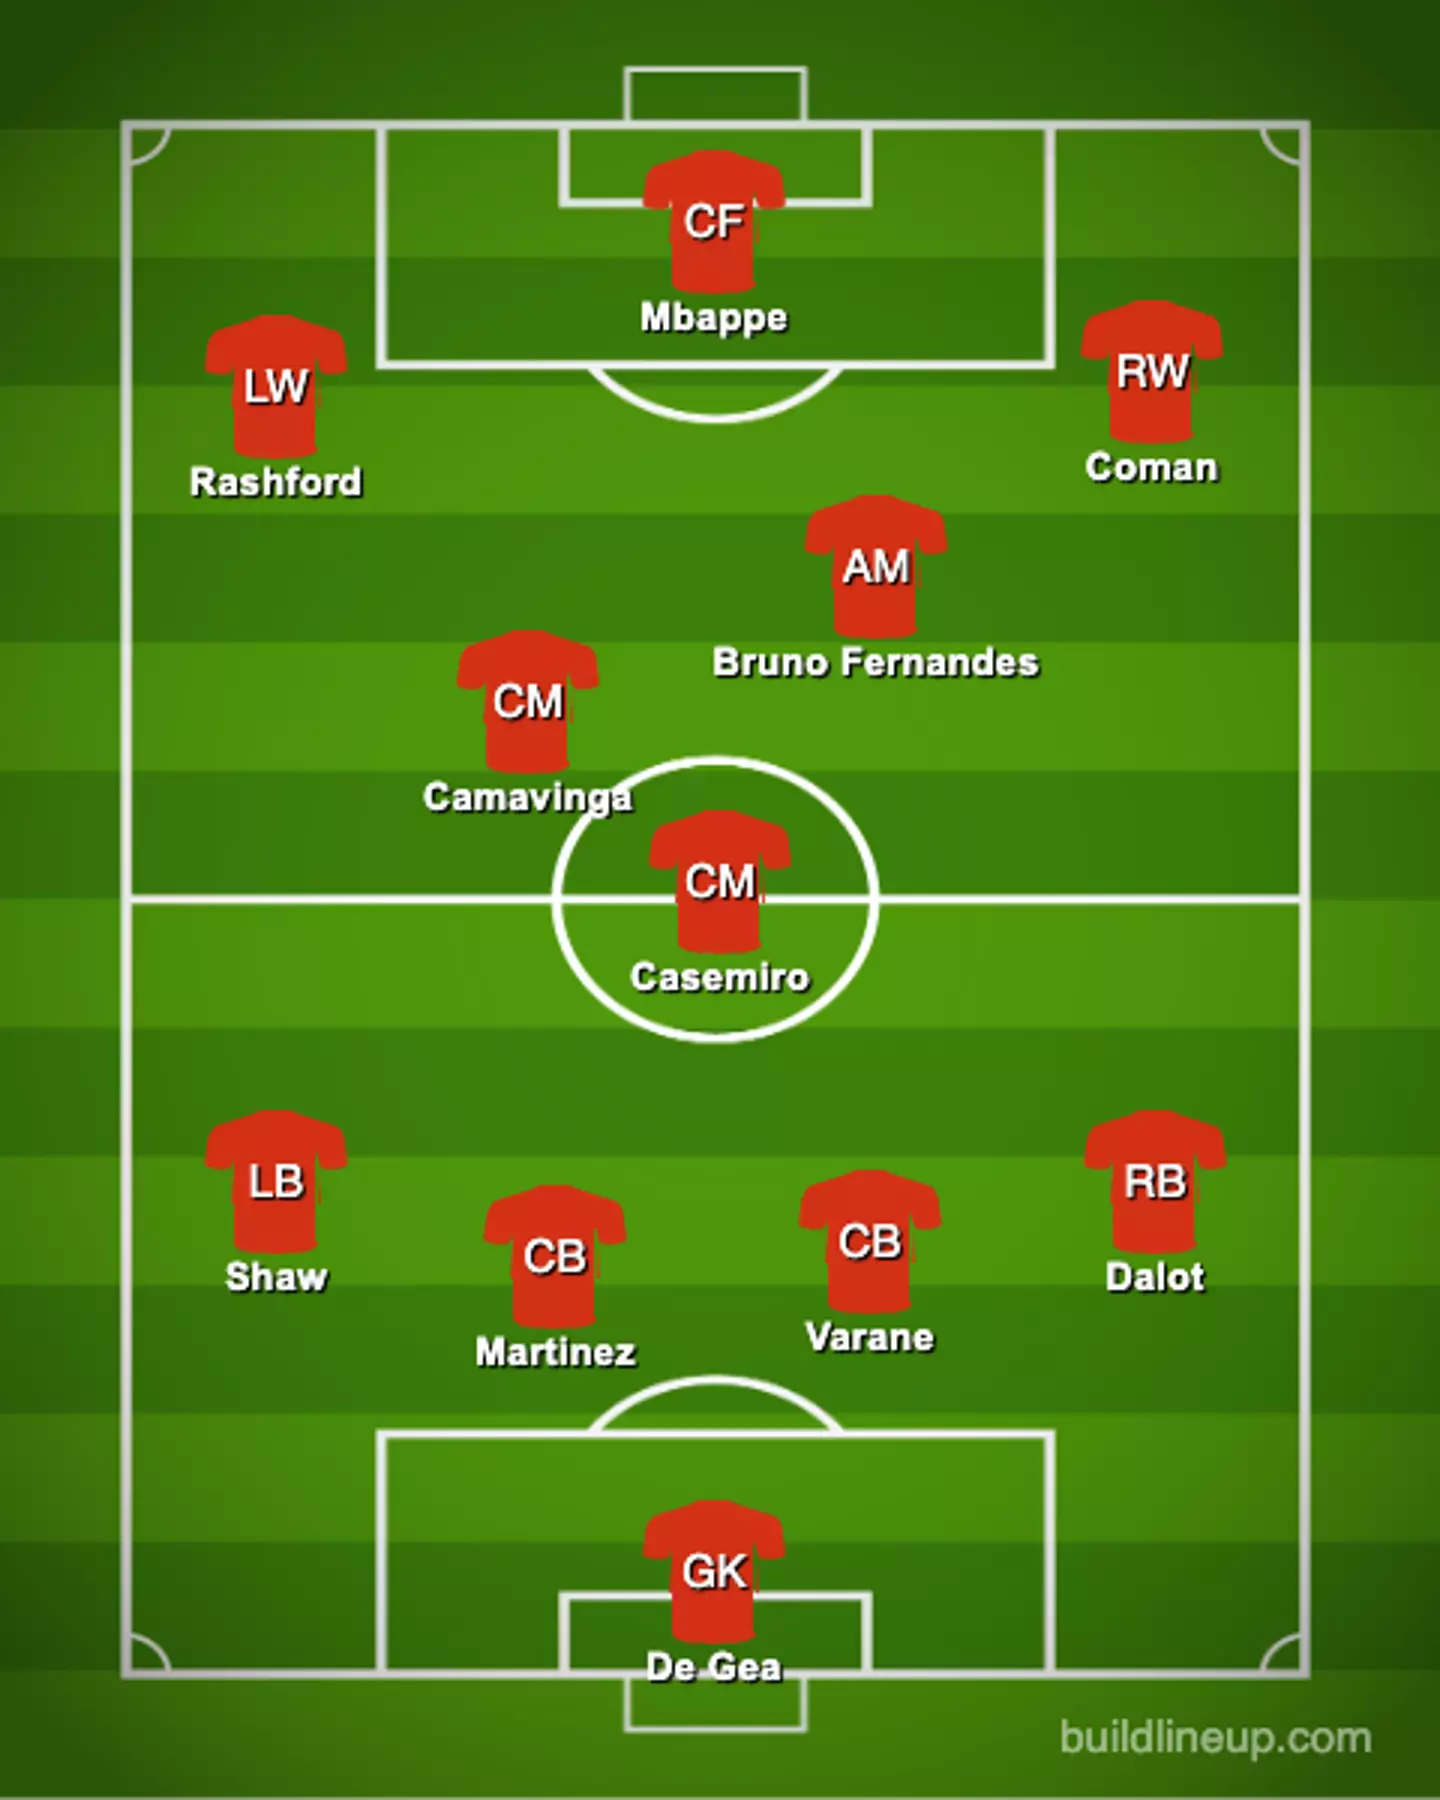 United could look like this under Sheikh Jassim (buildlineup.com)